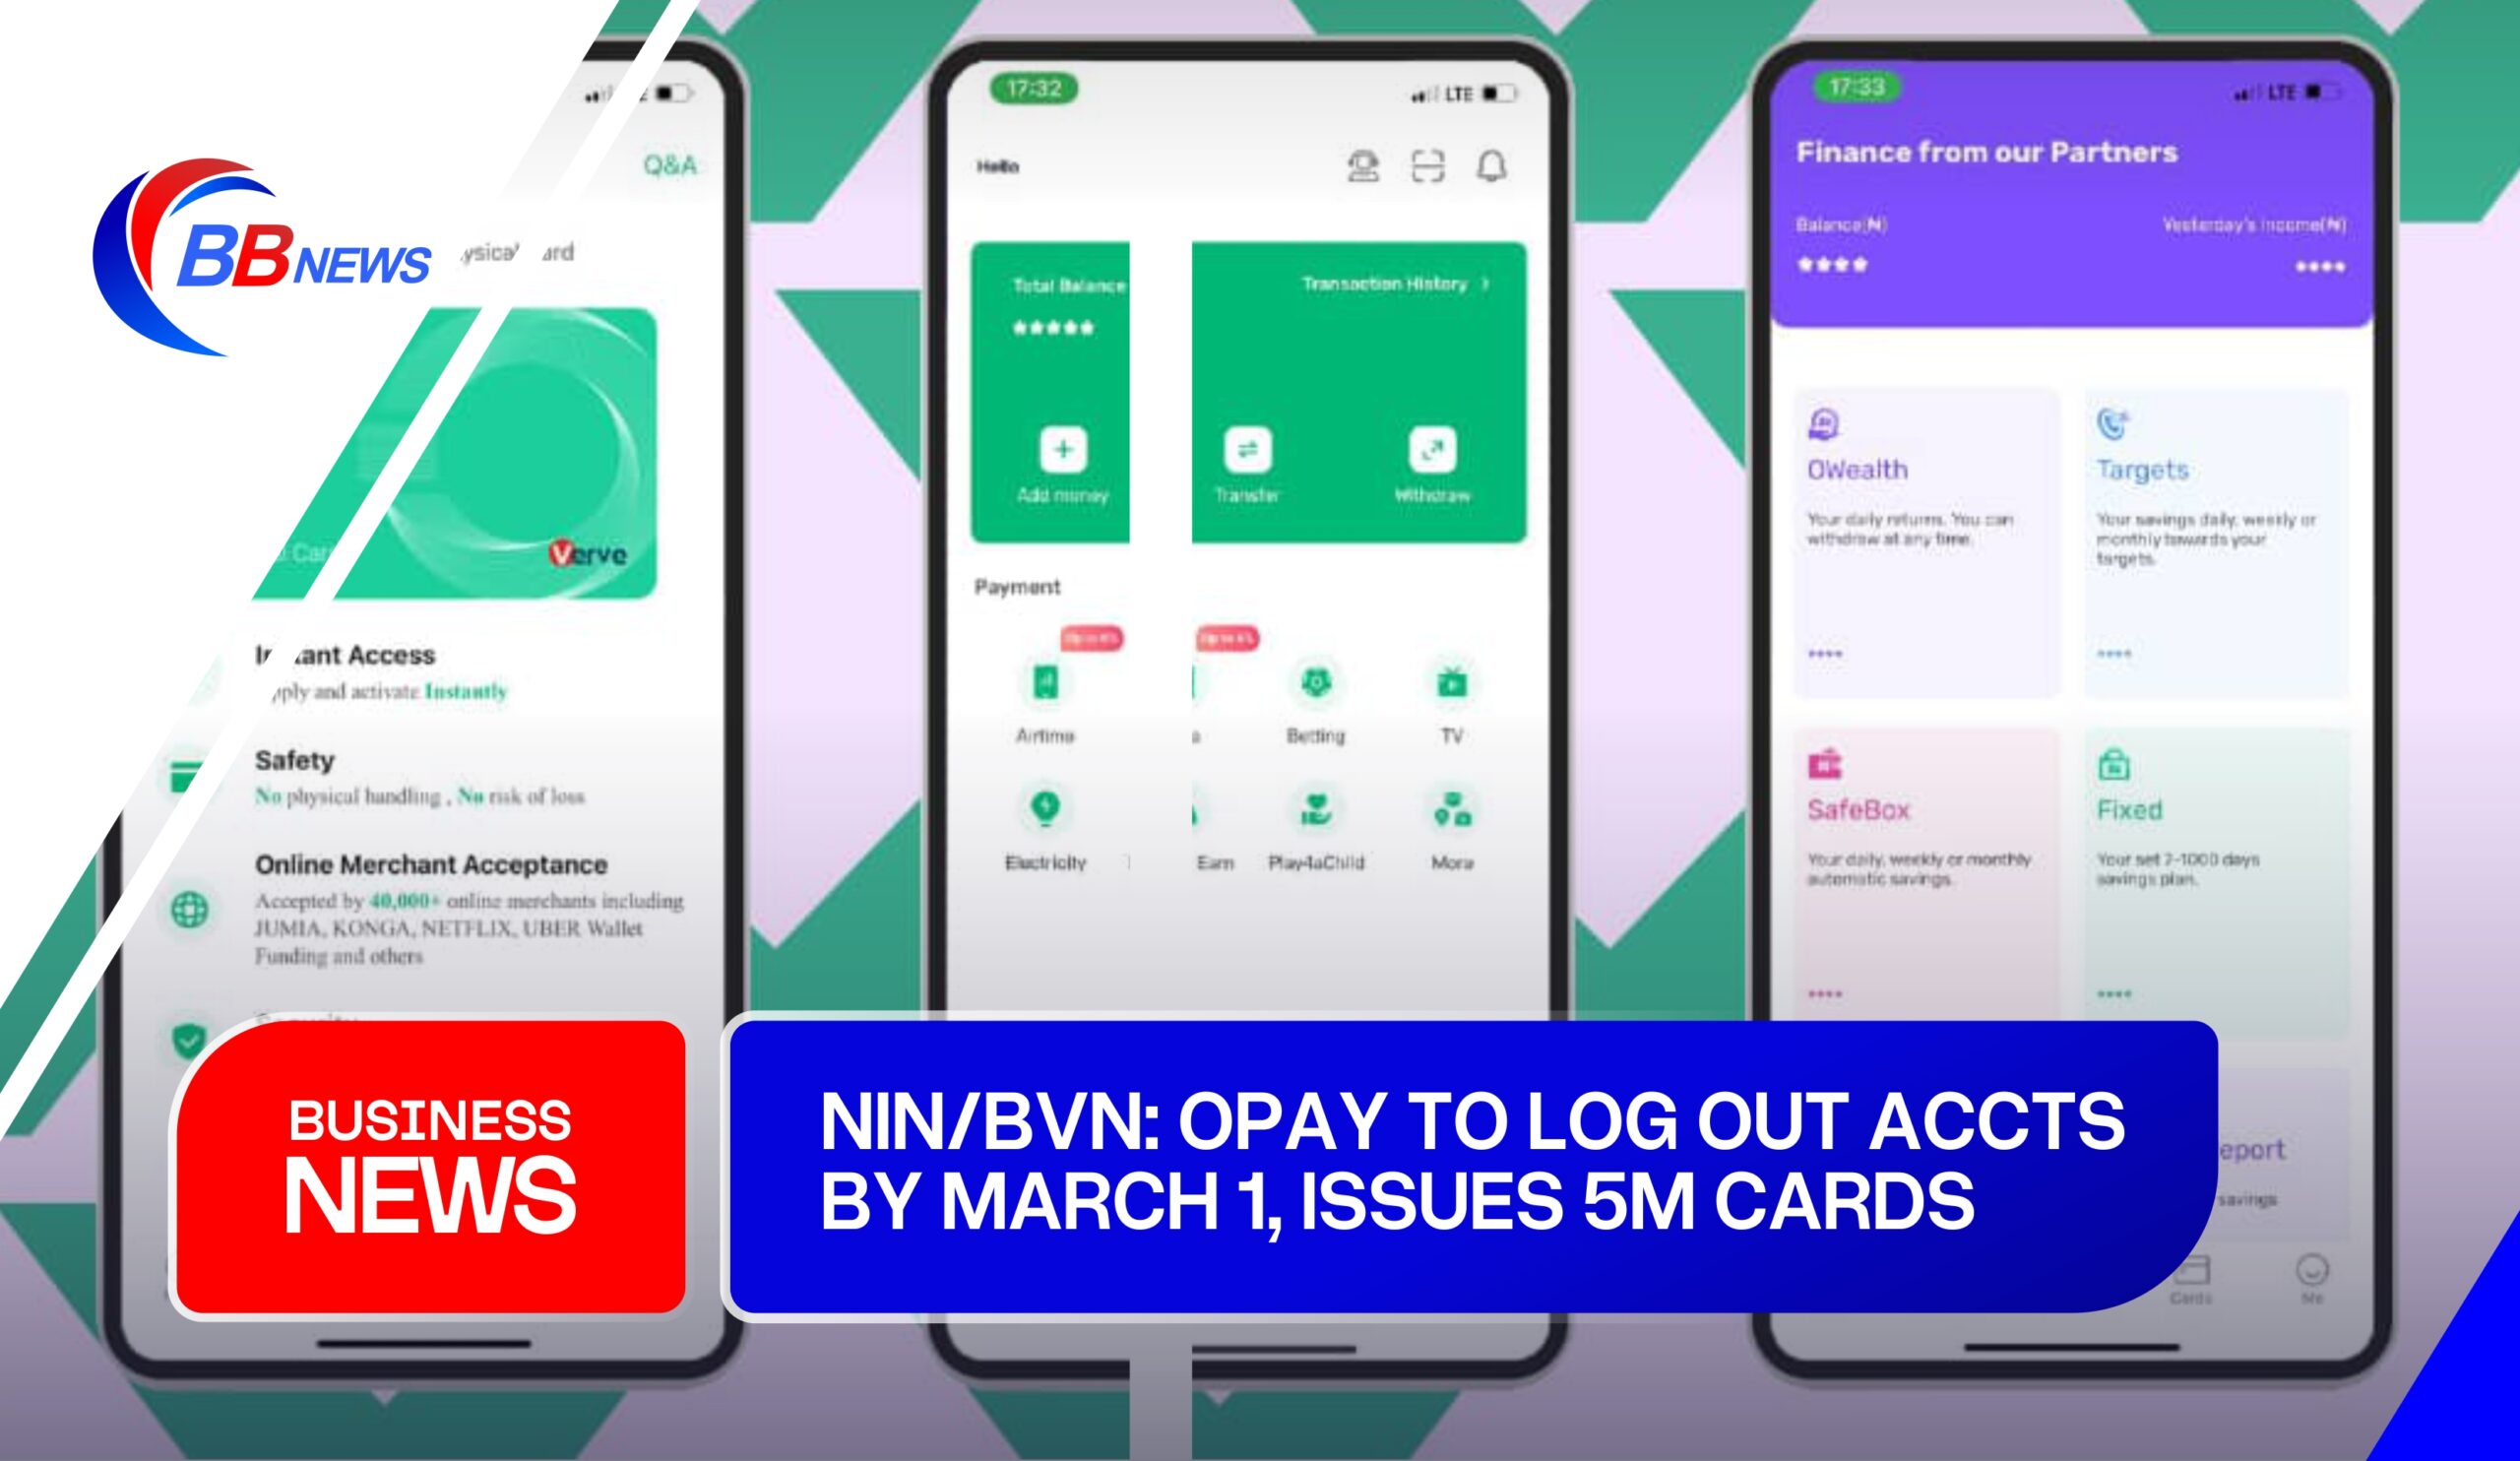 NIN/BVN: OPAY TO LOG OUT ACCOUNTS BY MARCH 1, ISSUES 5M CARDS